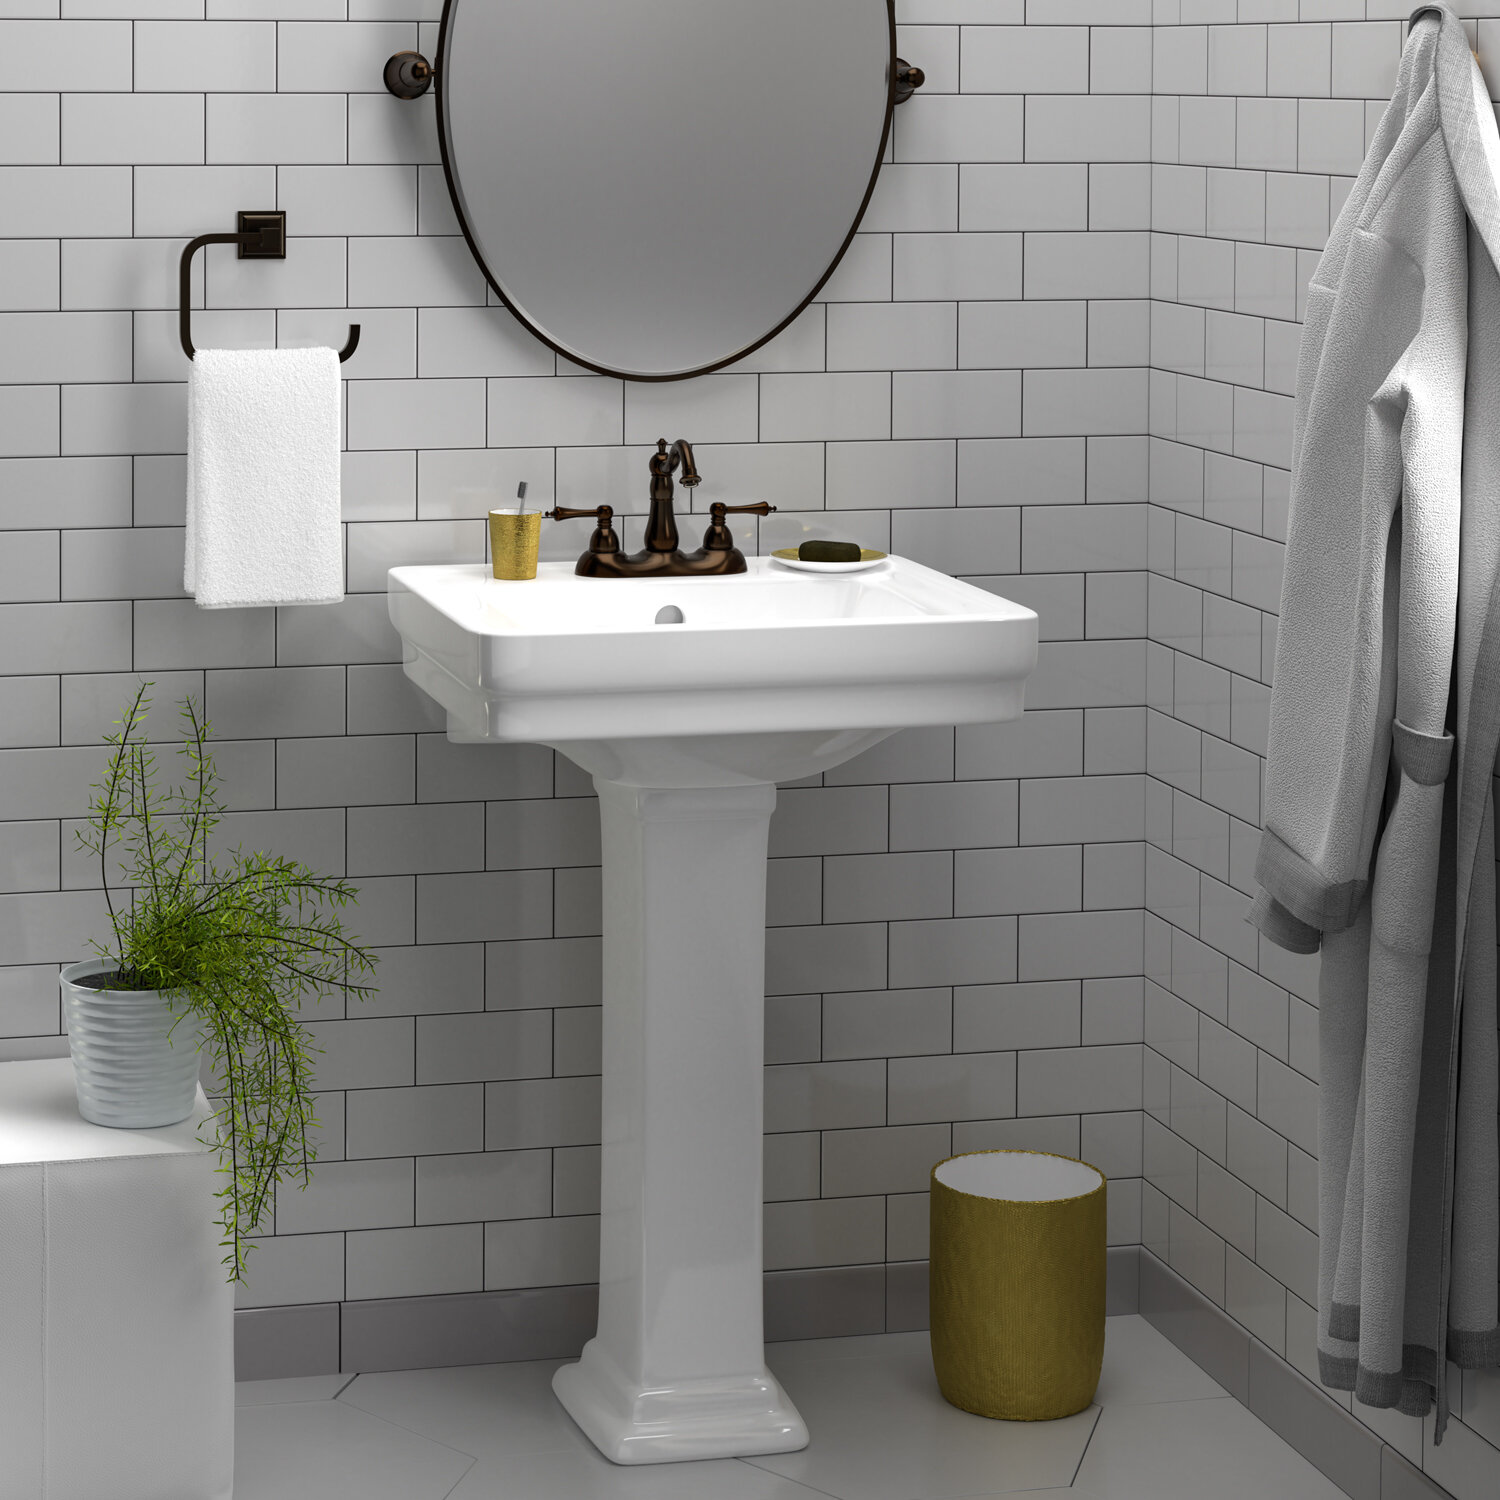 Barclay Sussex Vitreous China Rectangular Pedestal Bathroom Sink With Overflow Reviews Wayfair